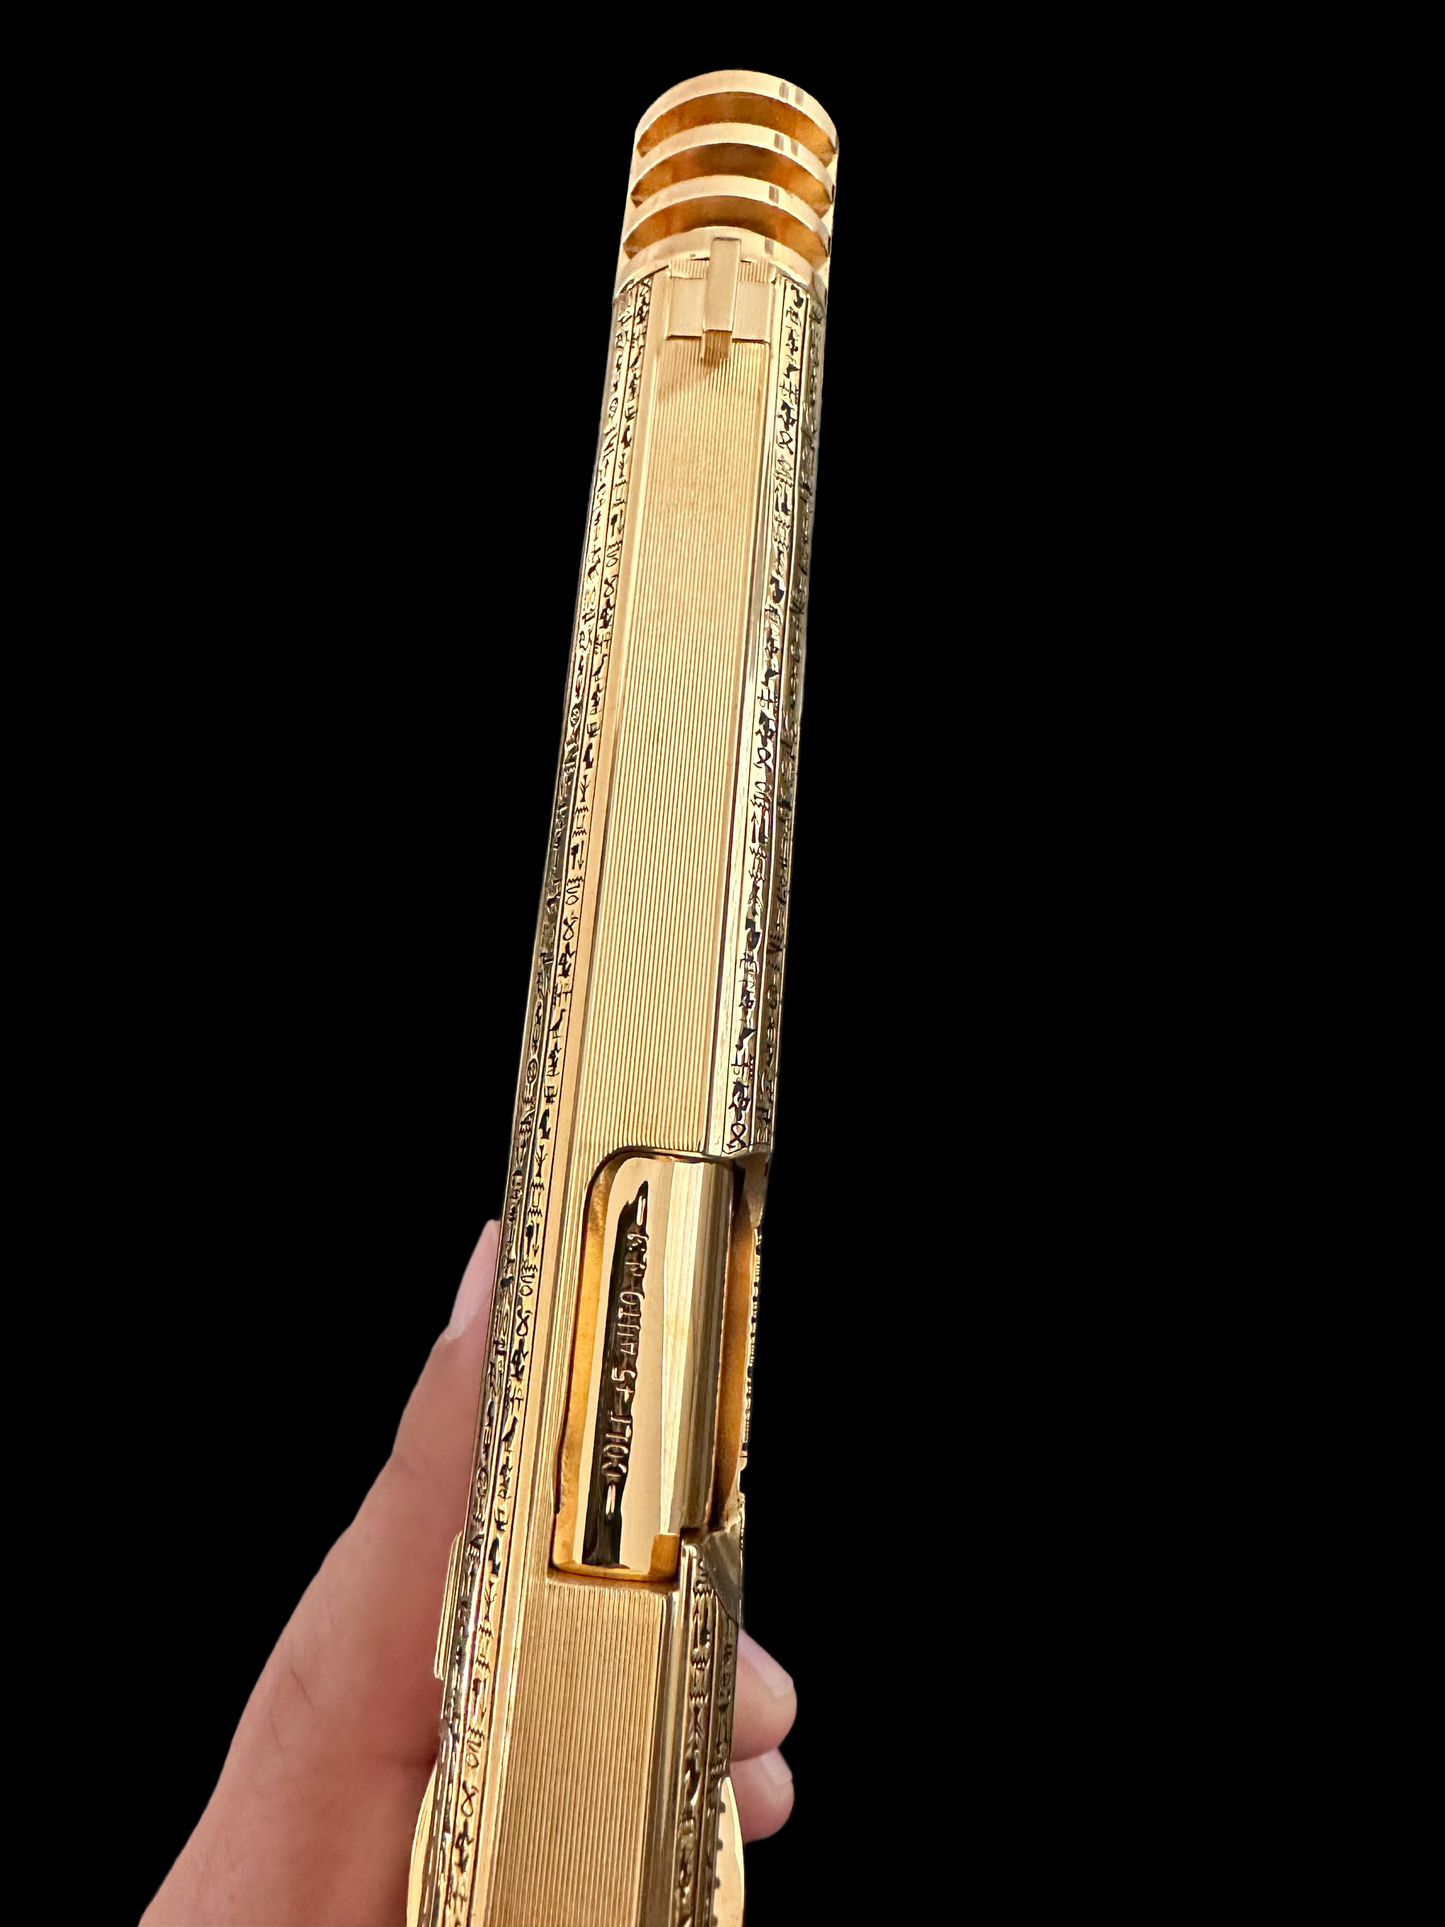 COLT CUSTOM 1911 GOLD CUP ENGRAVED POLISHED AND 24K GOLD PLATED NIB!!PRE-ORDER!!